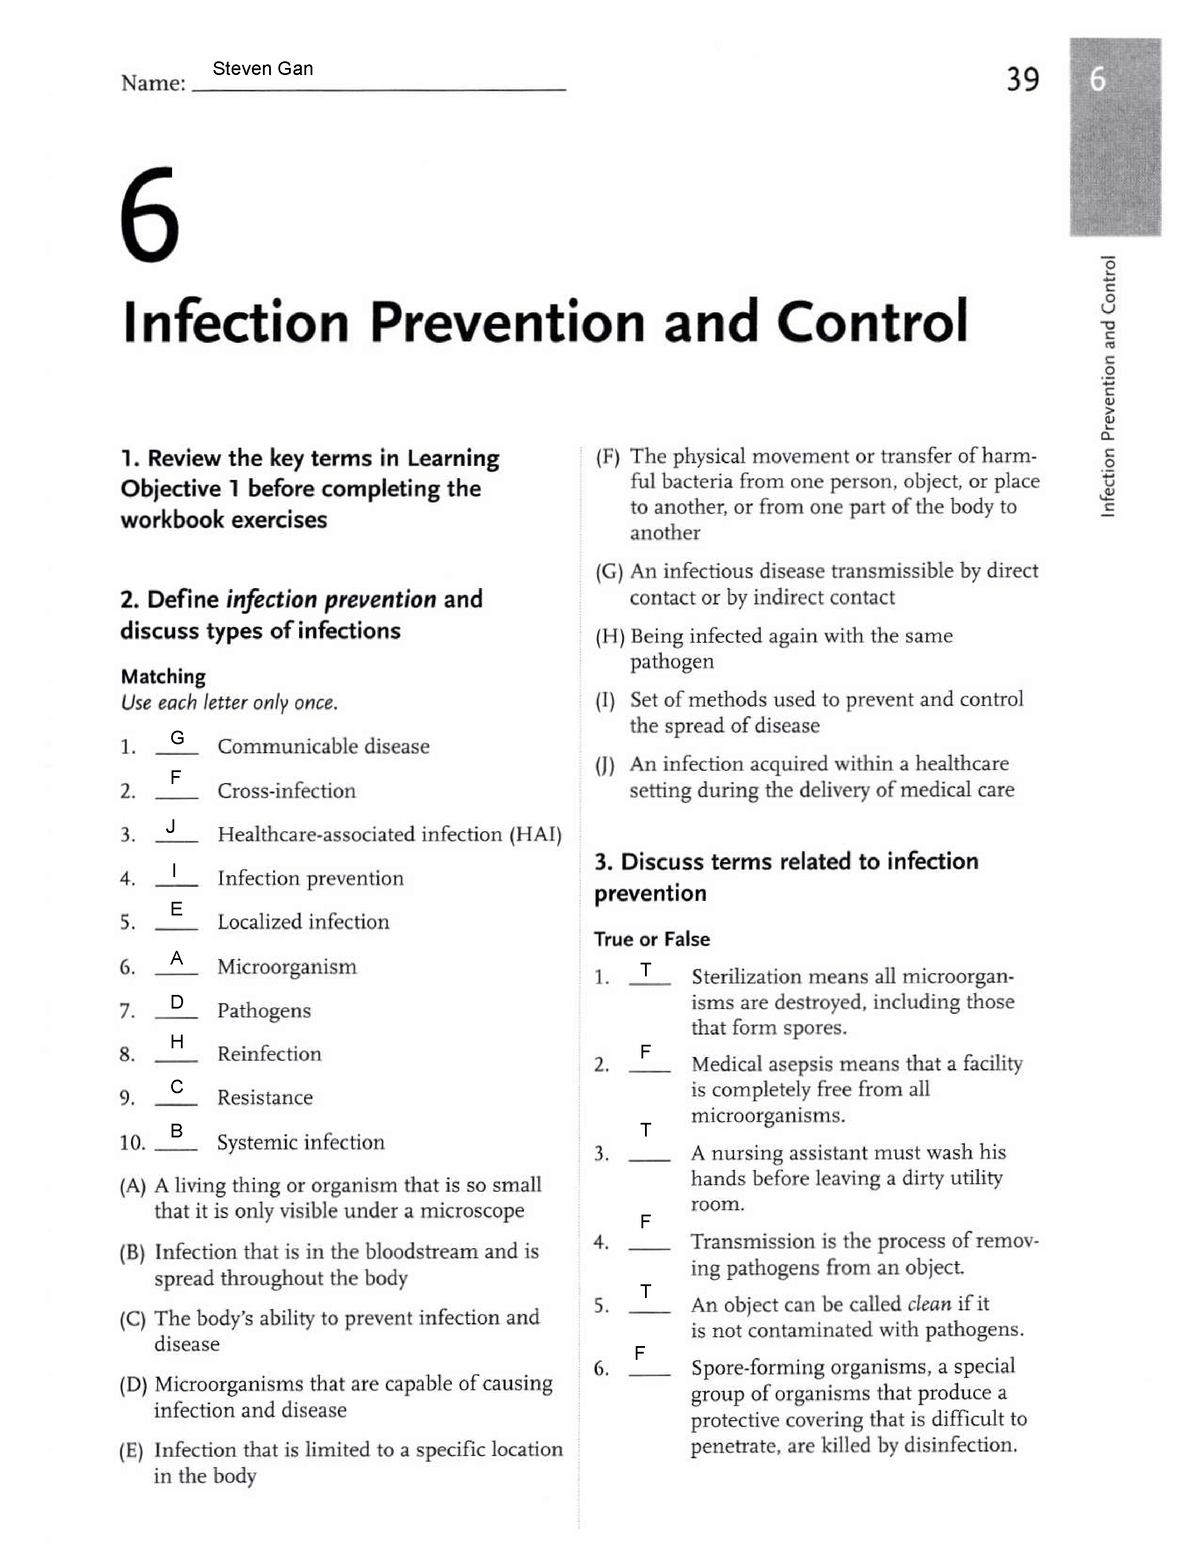 work-book-exercises-chapter-6-pdf-6-lnfection-prevention-and-control